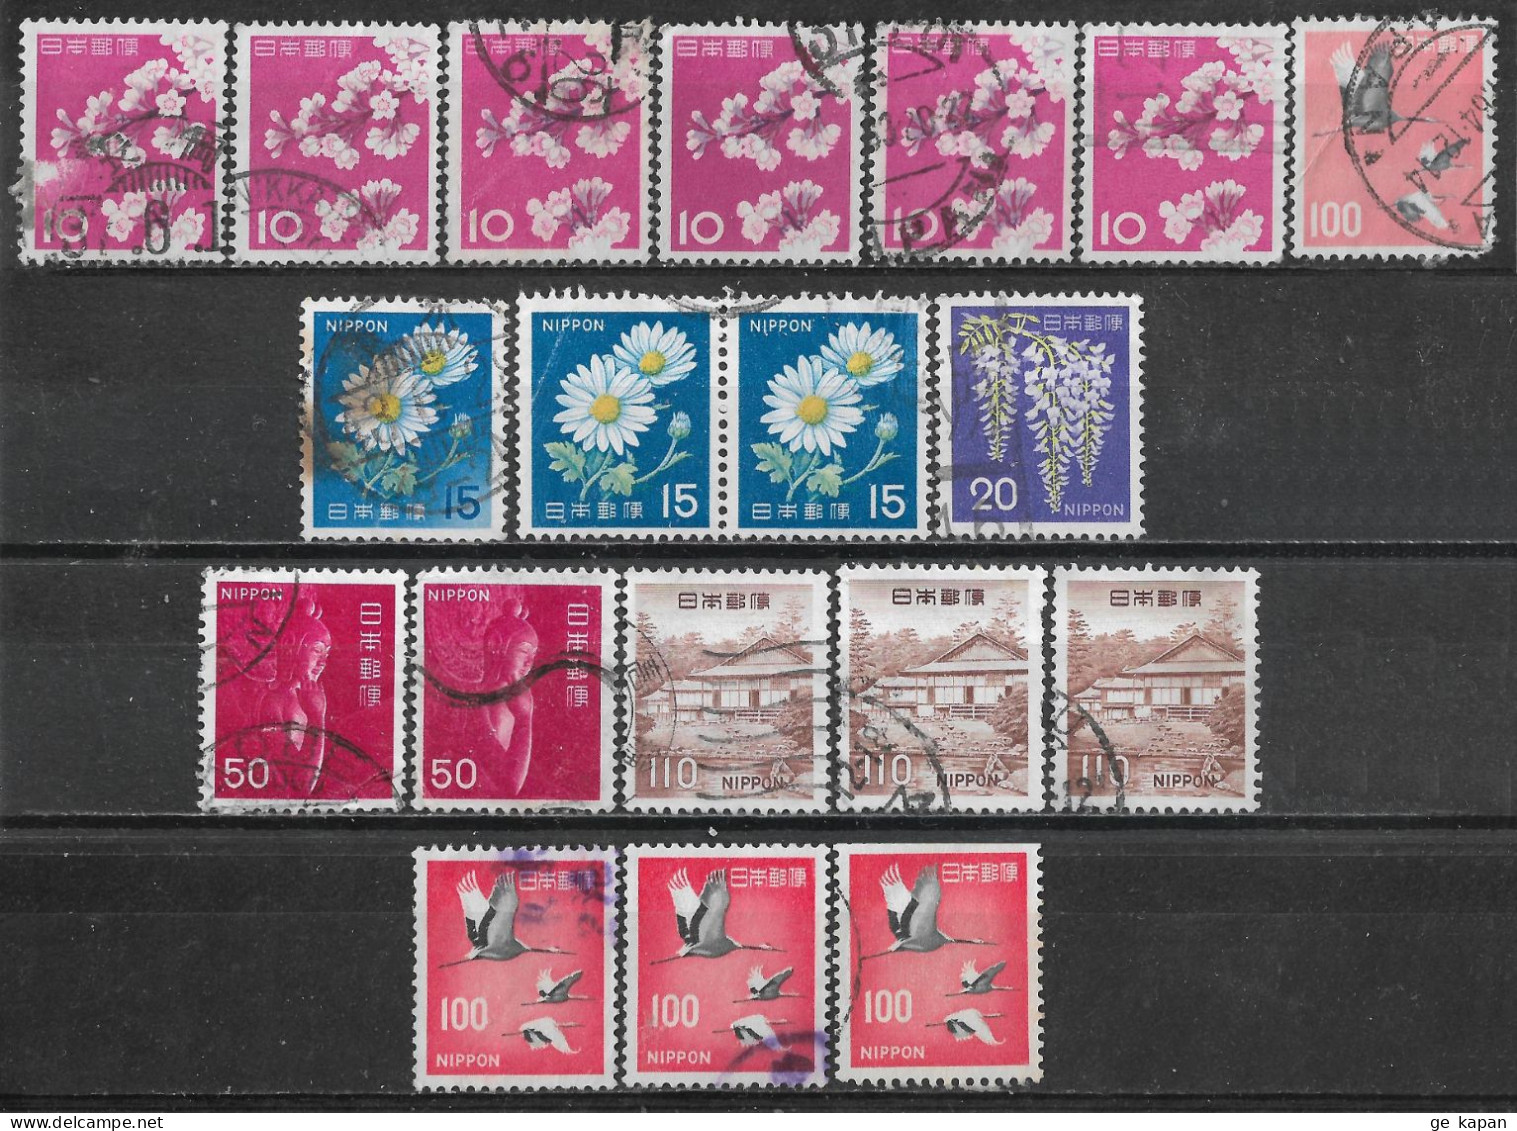 1961-1968 JAPAN Set Of 19 Used Stamps (Michel # 758A,764,930A,931A,932,937,943,1007A) CV €4.70 - Gebruikt